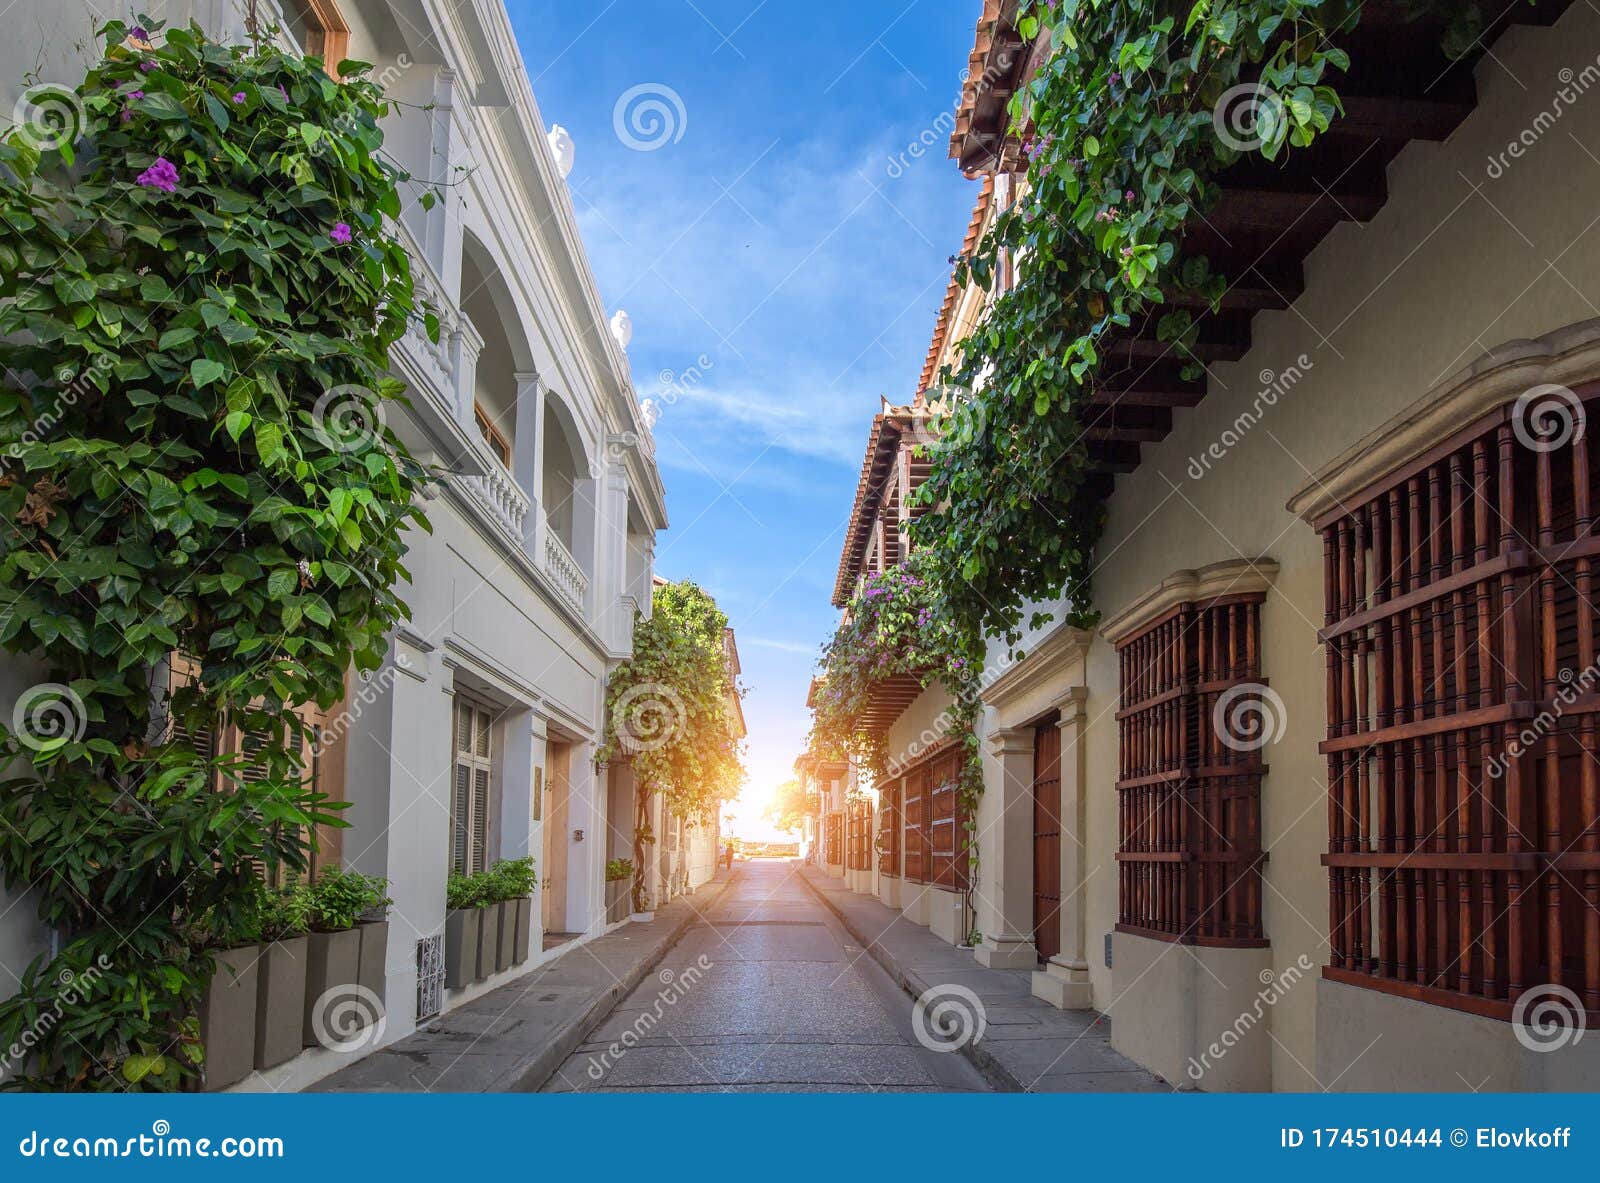 famous colonial cartagena walled city cuidad amurrallada and its colorful buildings in historic city center, a ated unesco